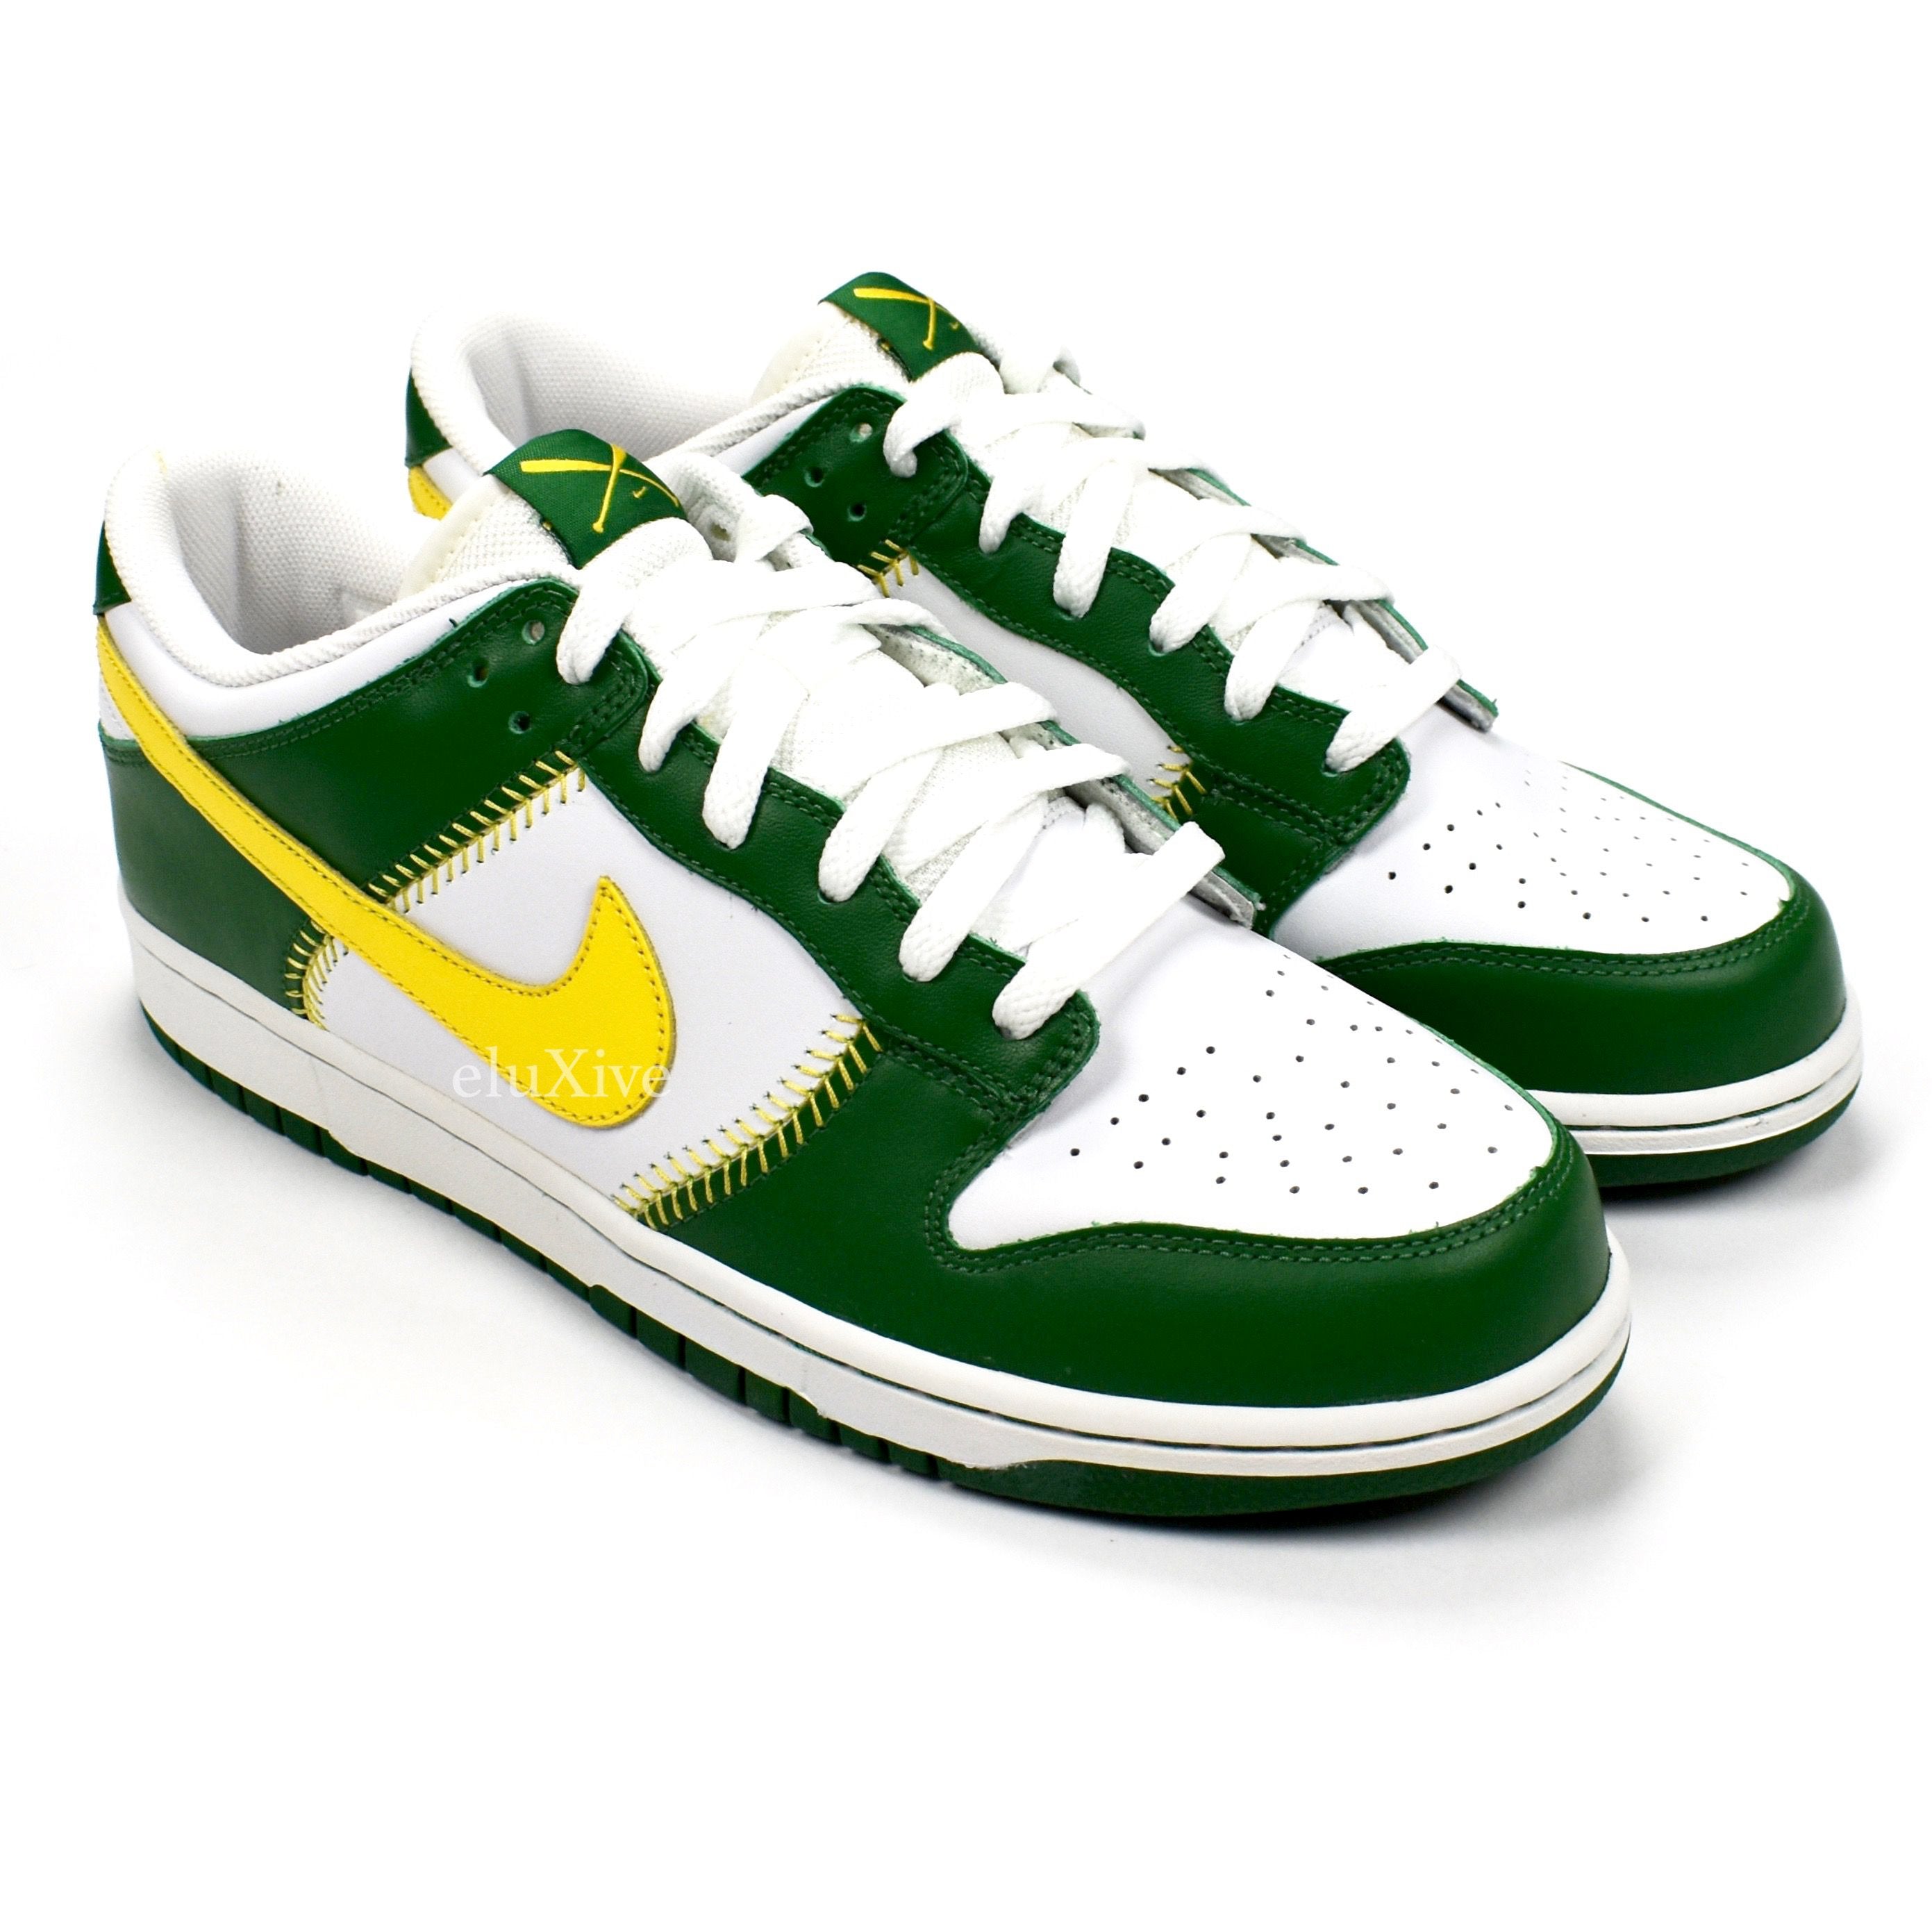 Nike - Dunk Low Baseball Pack 'Oakland A's' – eluXive